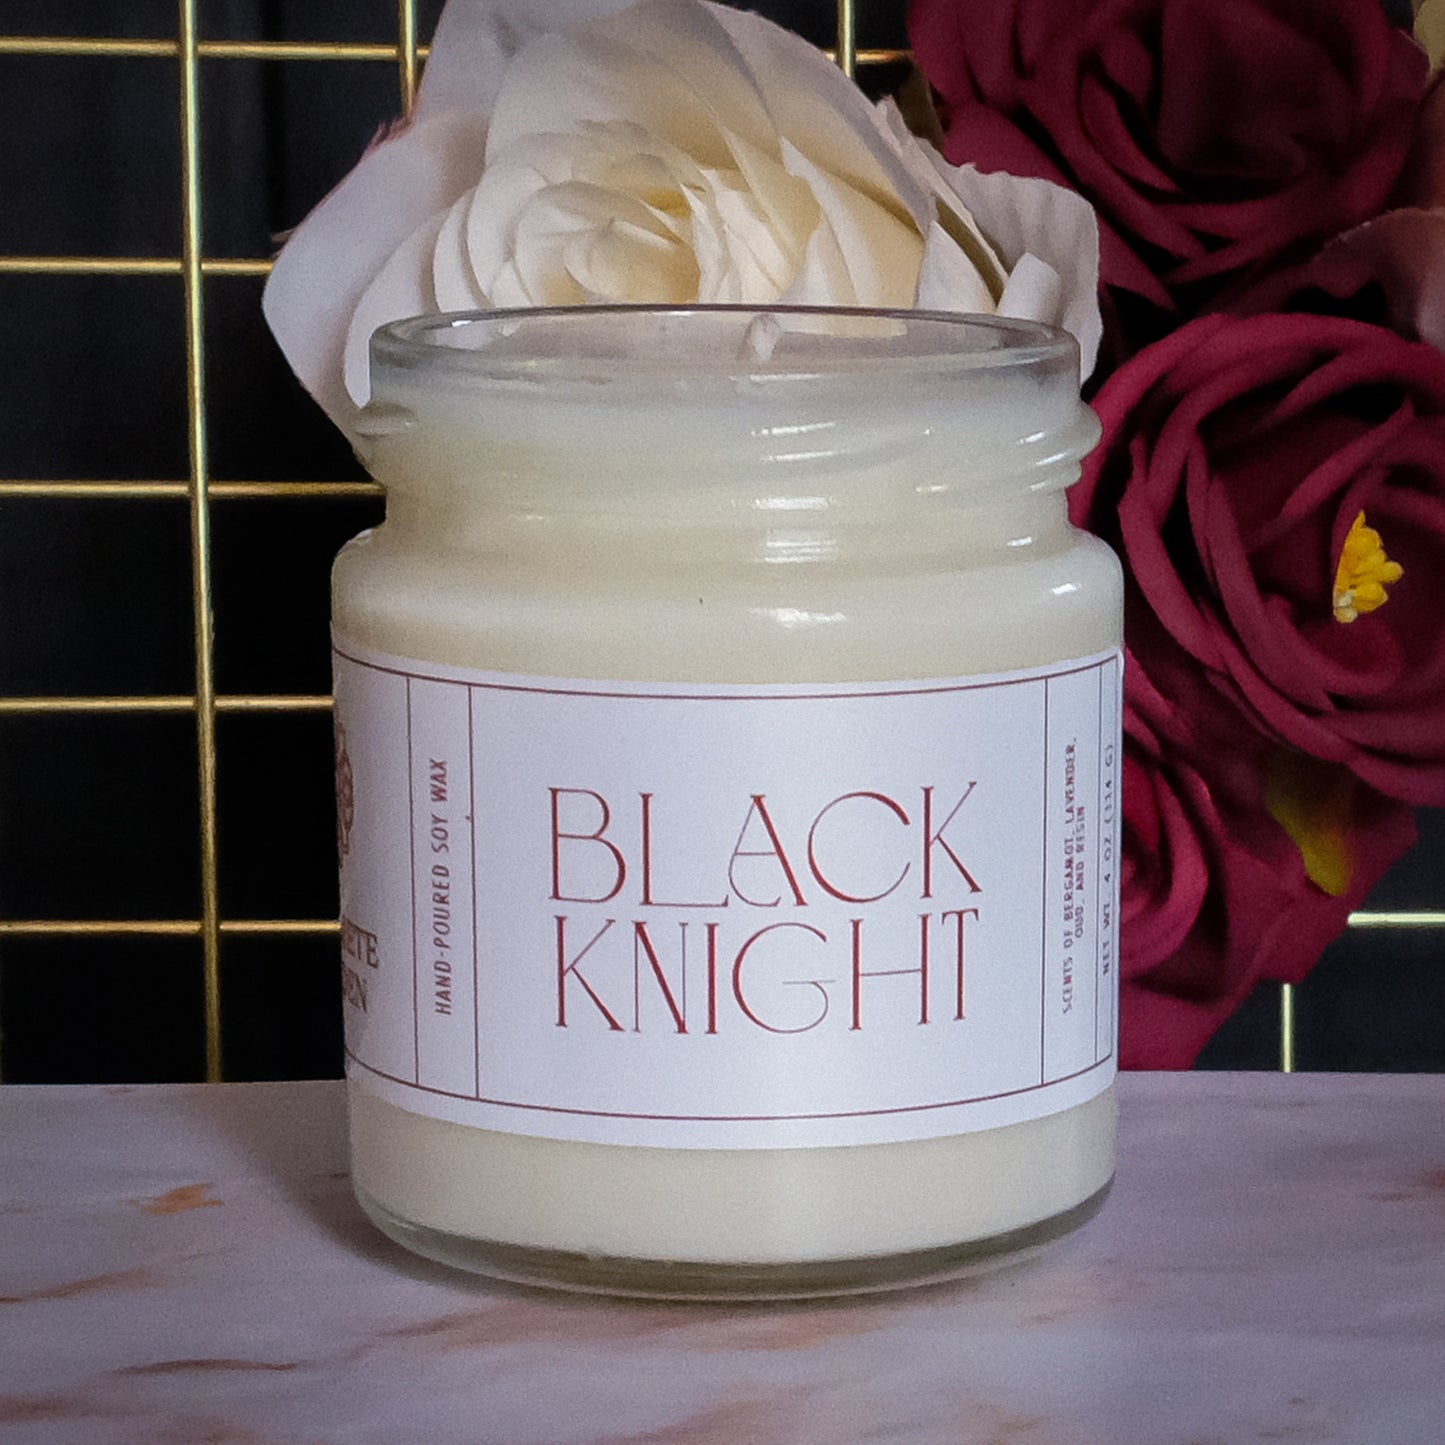 Black Knight - Oud and Patchouli Soy Candle